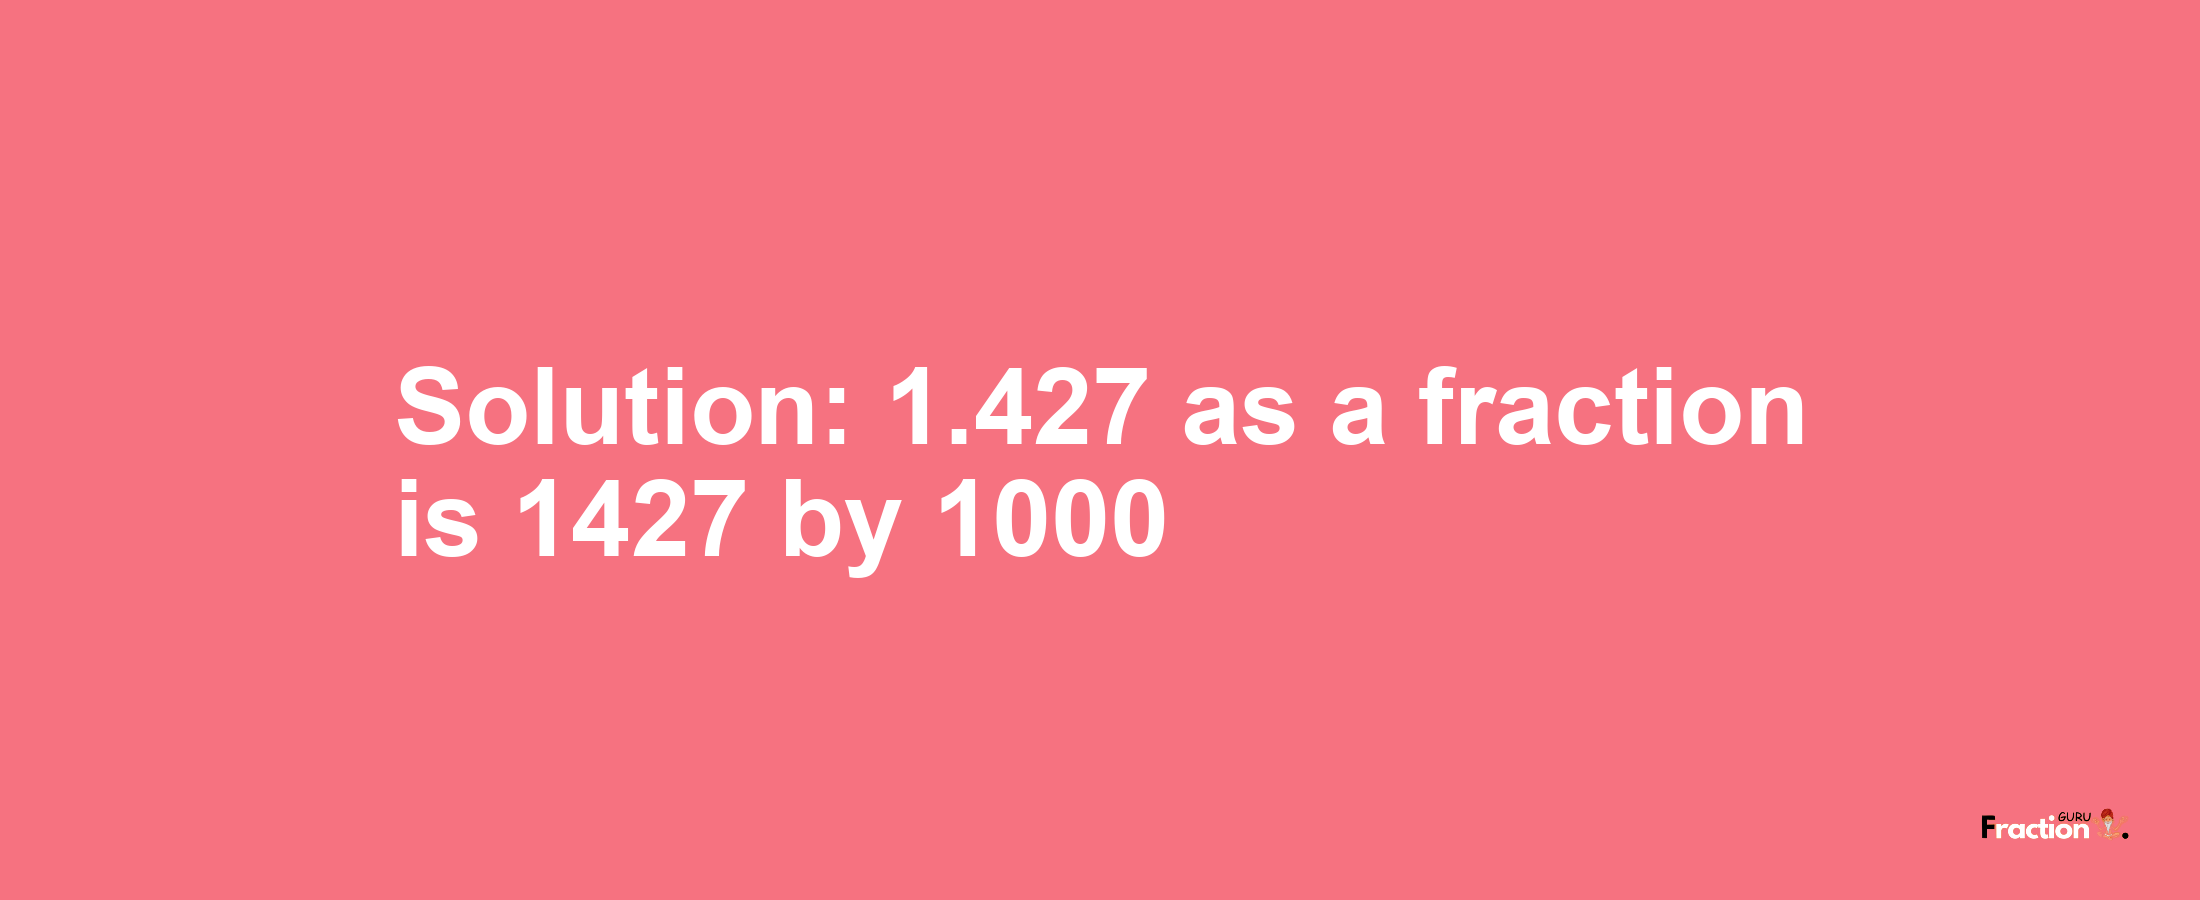 Solution:1.427 as a fraction is 1427/1000